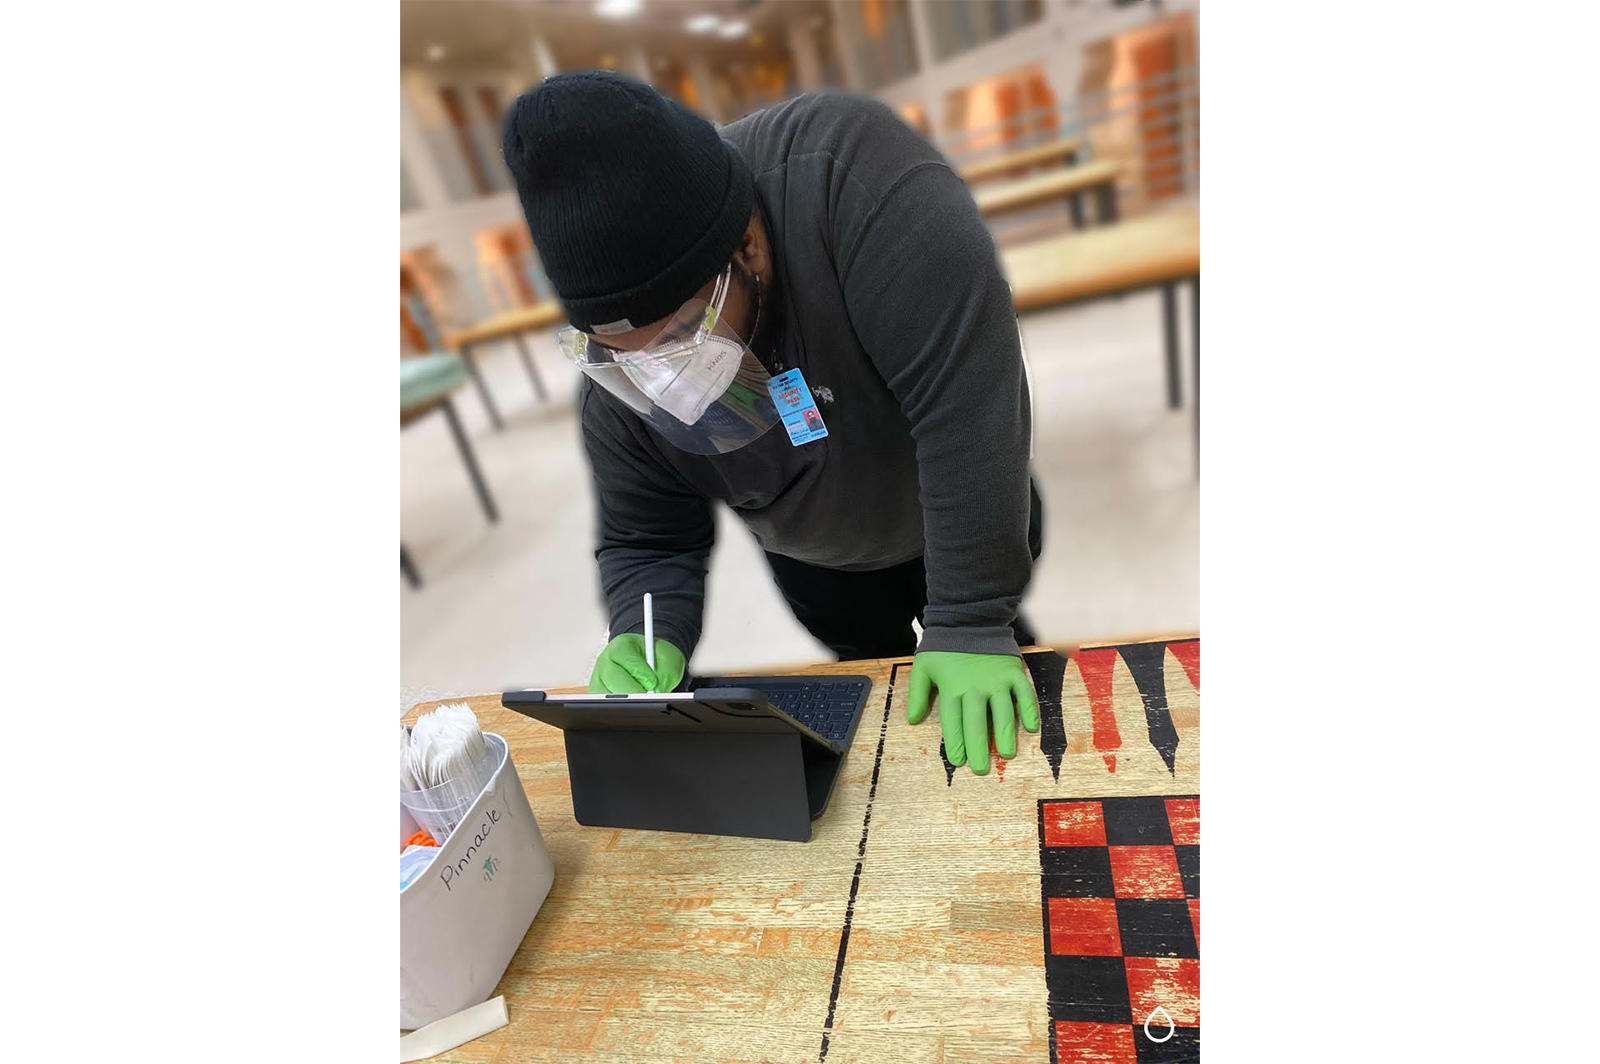 Antonio Cleveland, a disease intervention specialist with the Jail Health division of Wayne County’s Department of Health, Human, and Veterans Services, conducts COVID-19 contact tracing and testing for an individual booked into a Wayne County Jail.